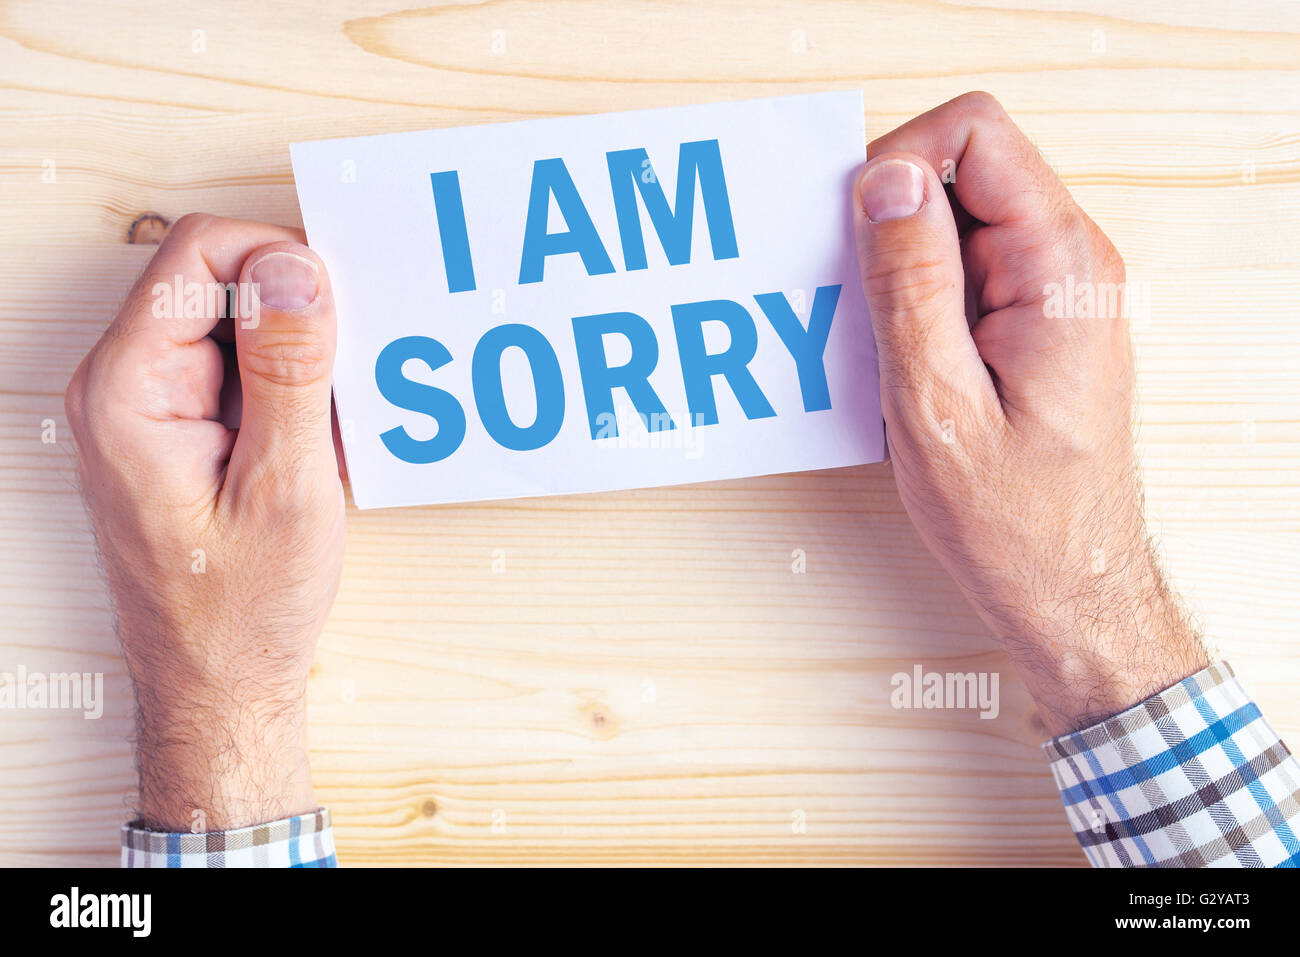 I am sorry message, top view of male hands holding apologizing card Stock Photo